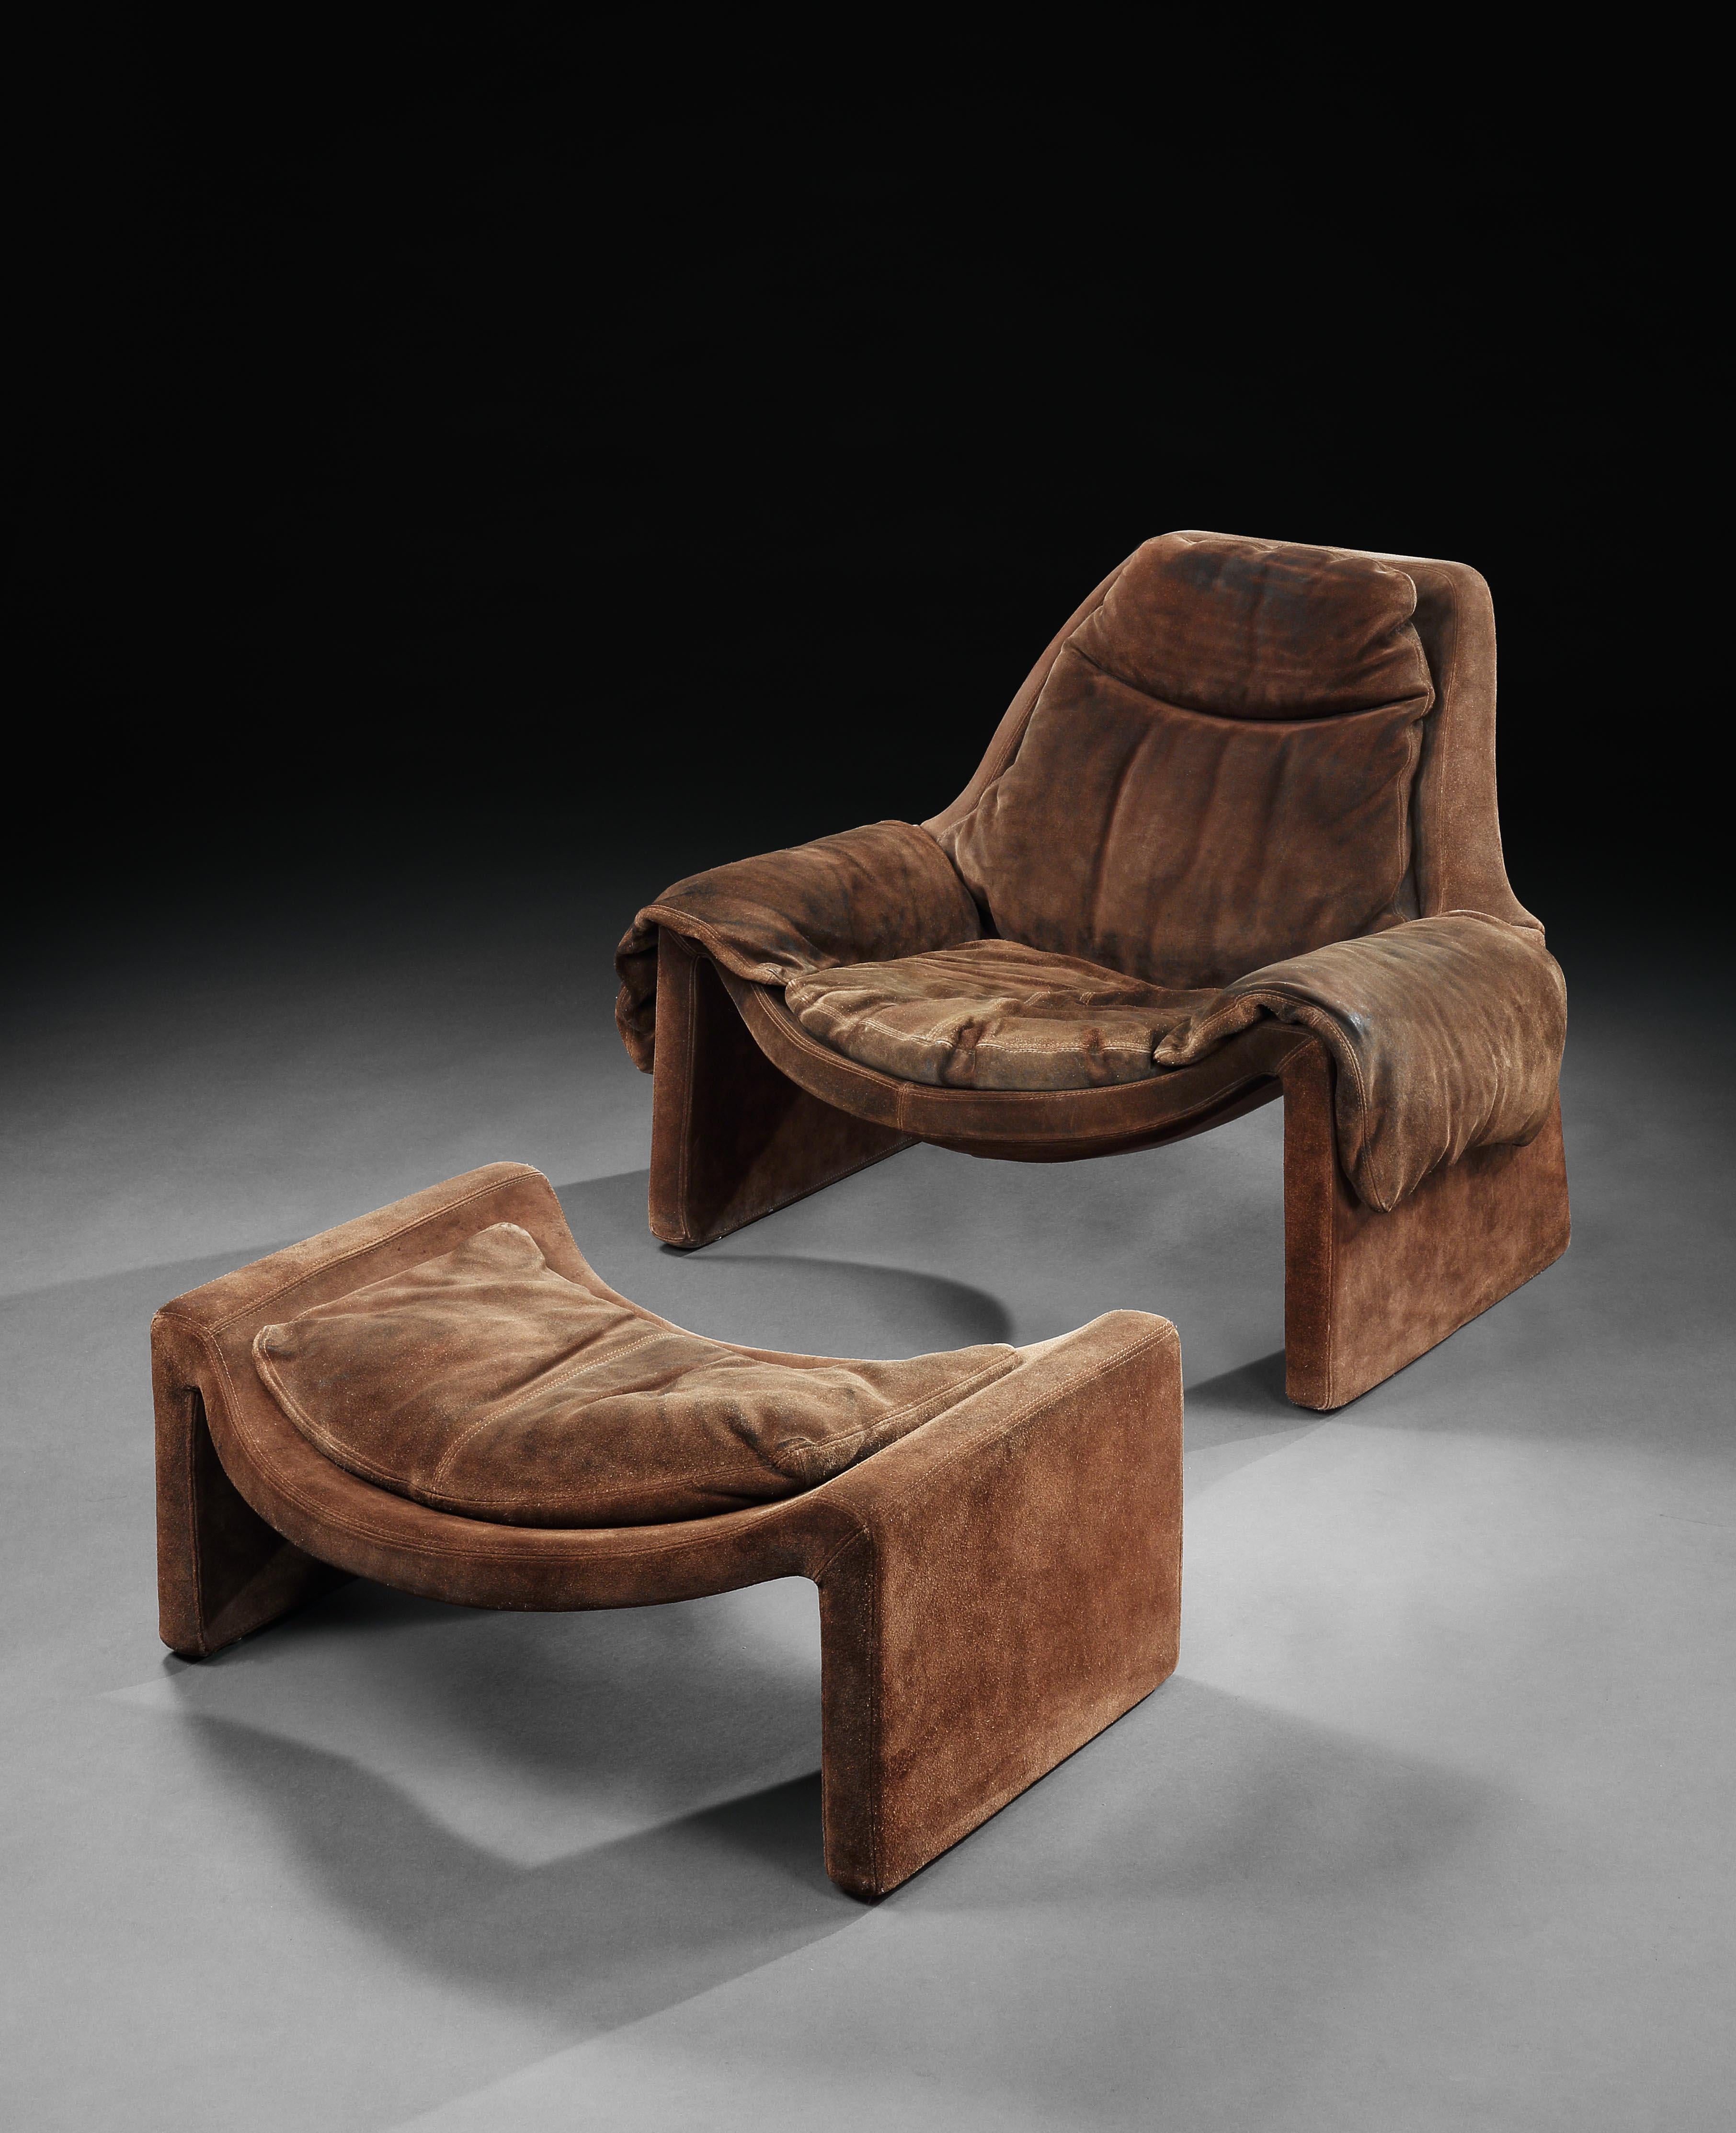 A really comfortable armchair with a striking, saddle-effect seat and matching ottoman echoing and complementing the curves of the armchair. Both retaining their original brown suede upholstery. Harmonic steel frames, injected polyurethane foam and